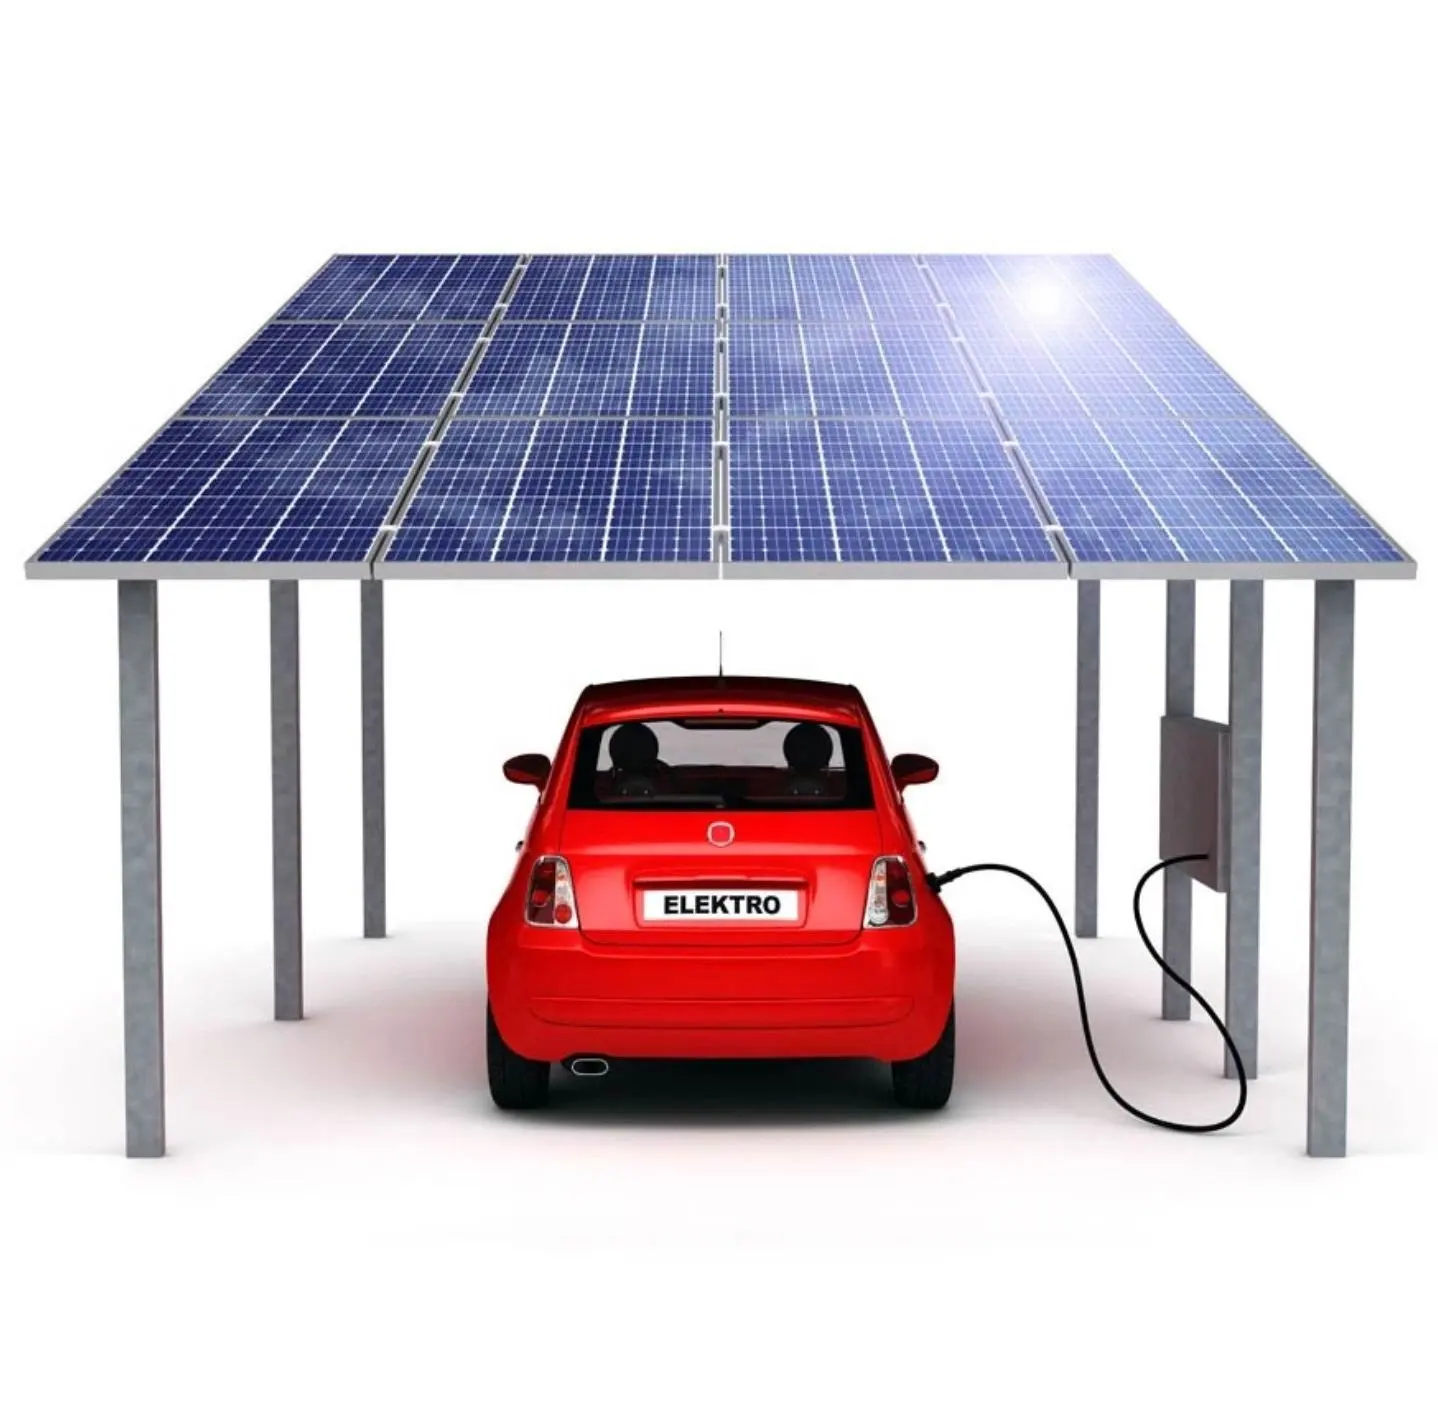 Full Package 5kw /15KW Household Solar Energy System Solahomerportgridar Parking Car System with Lithium Battery /10KW Channel